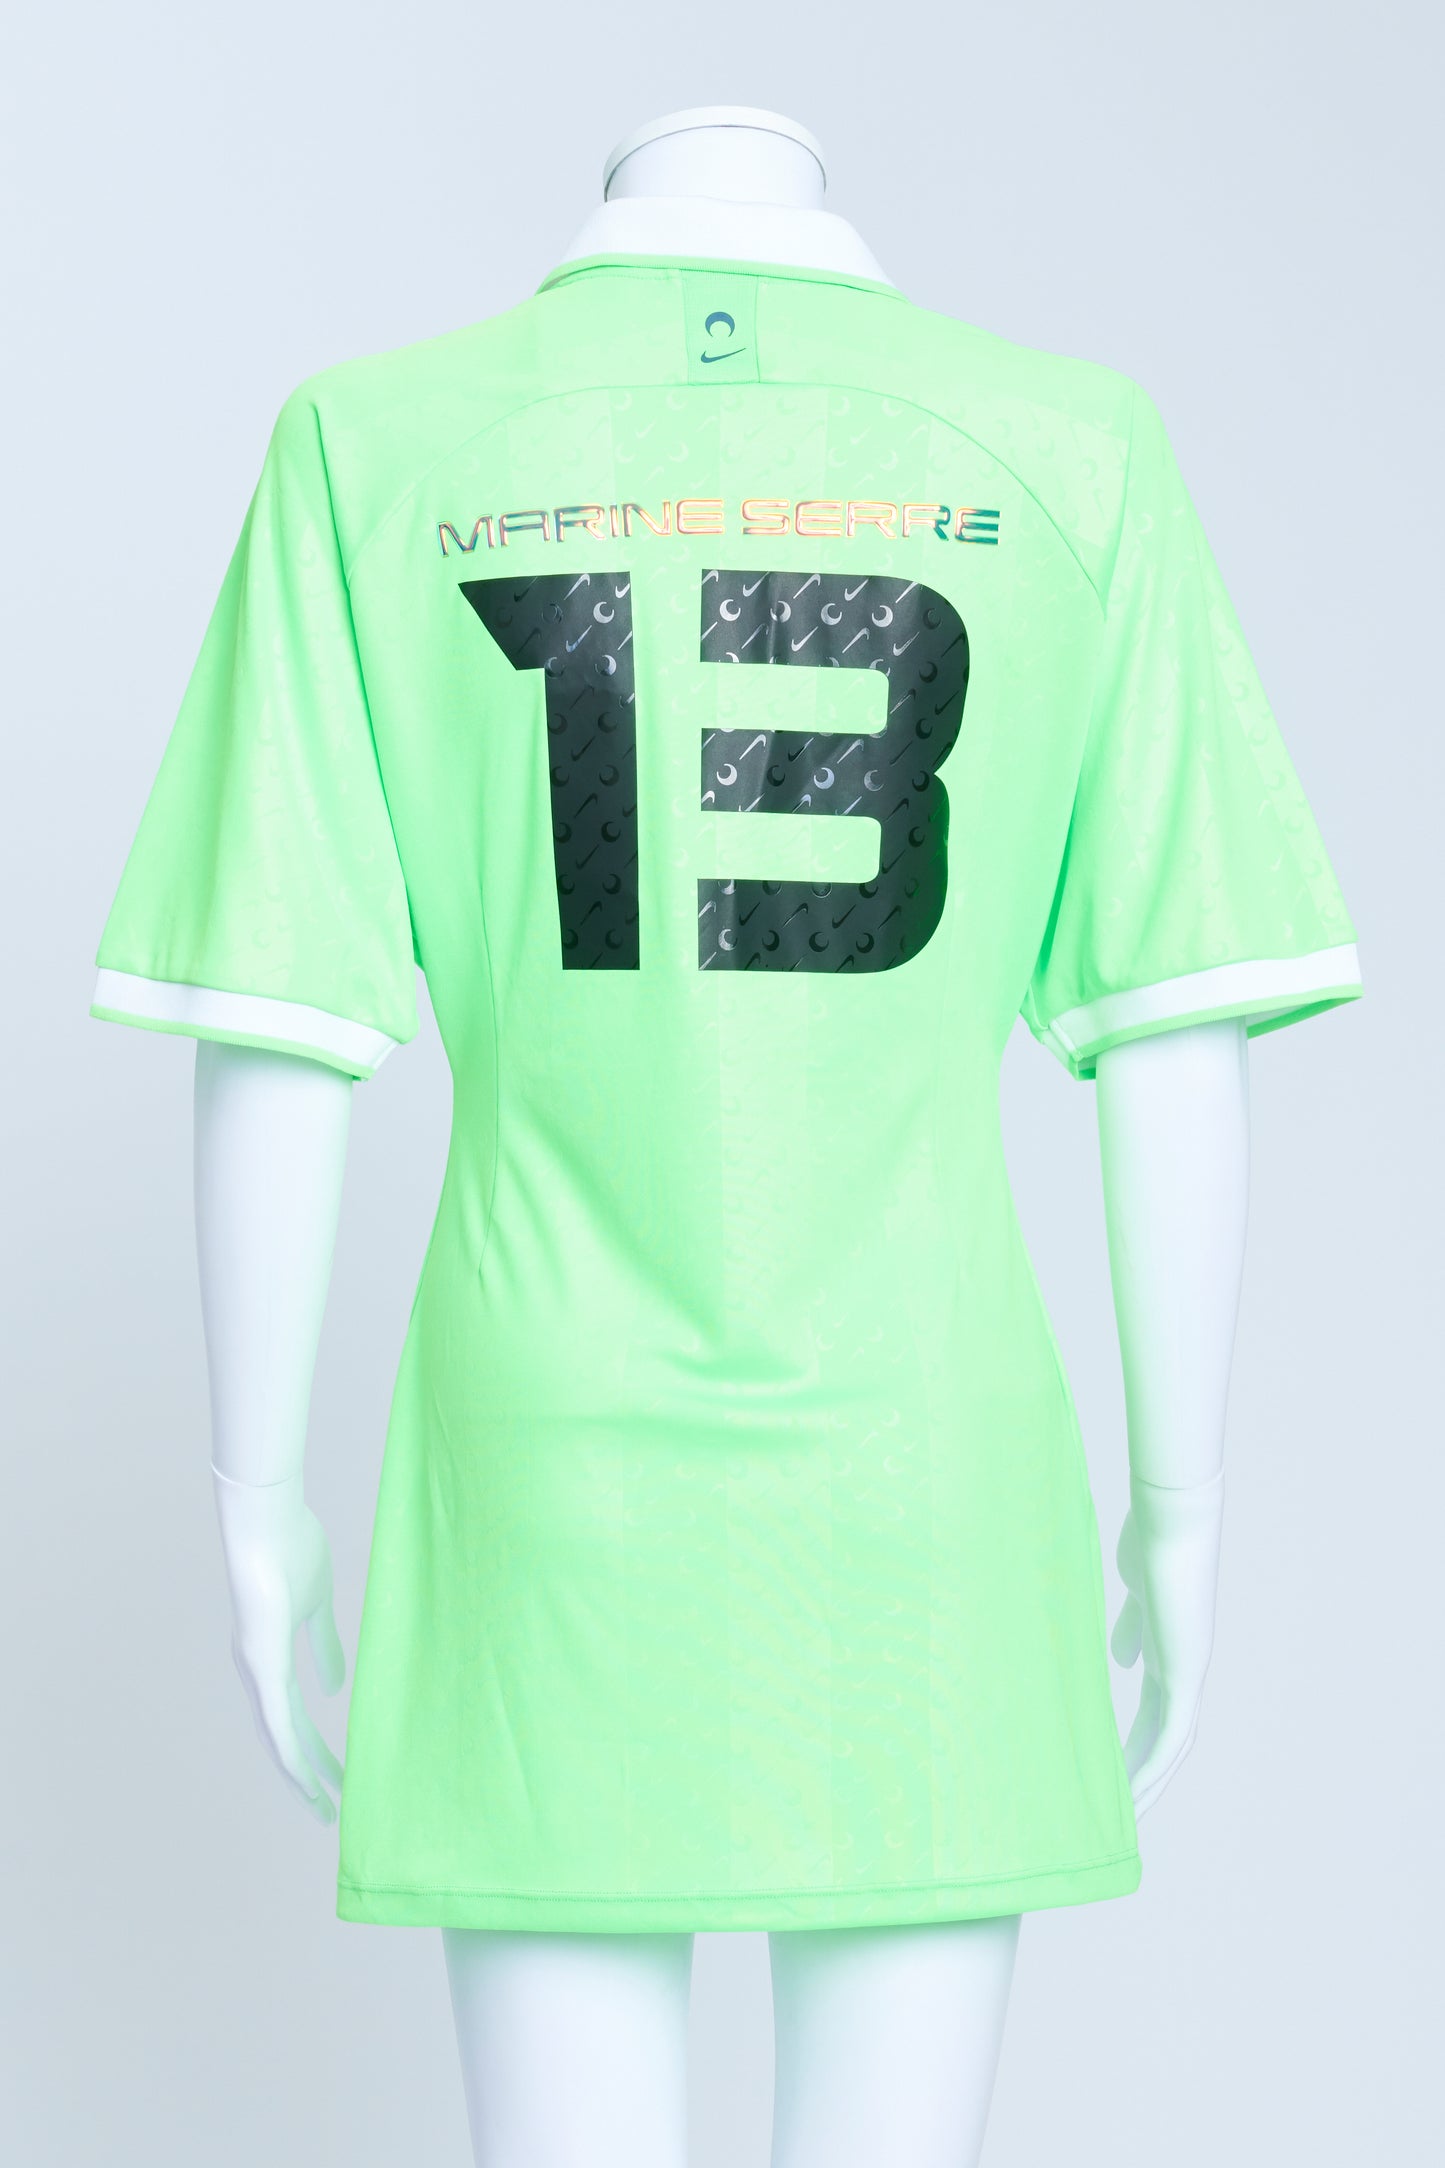 Neon Green Fitted Football Jersey Dress